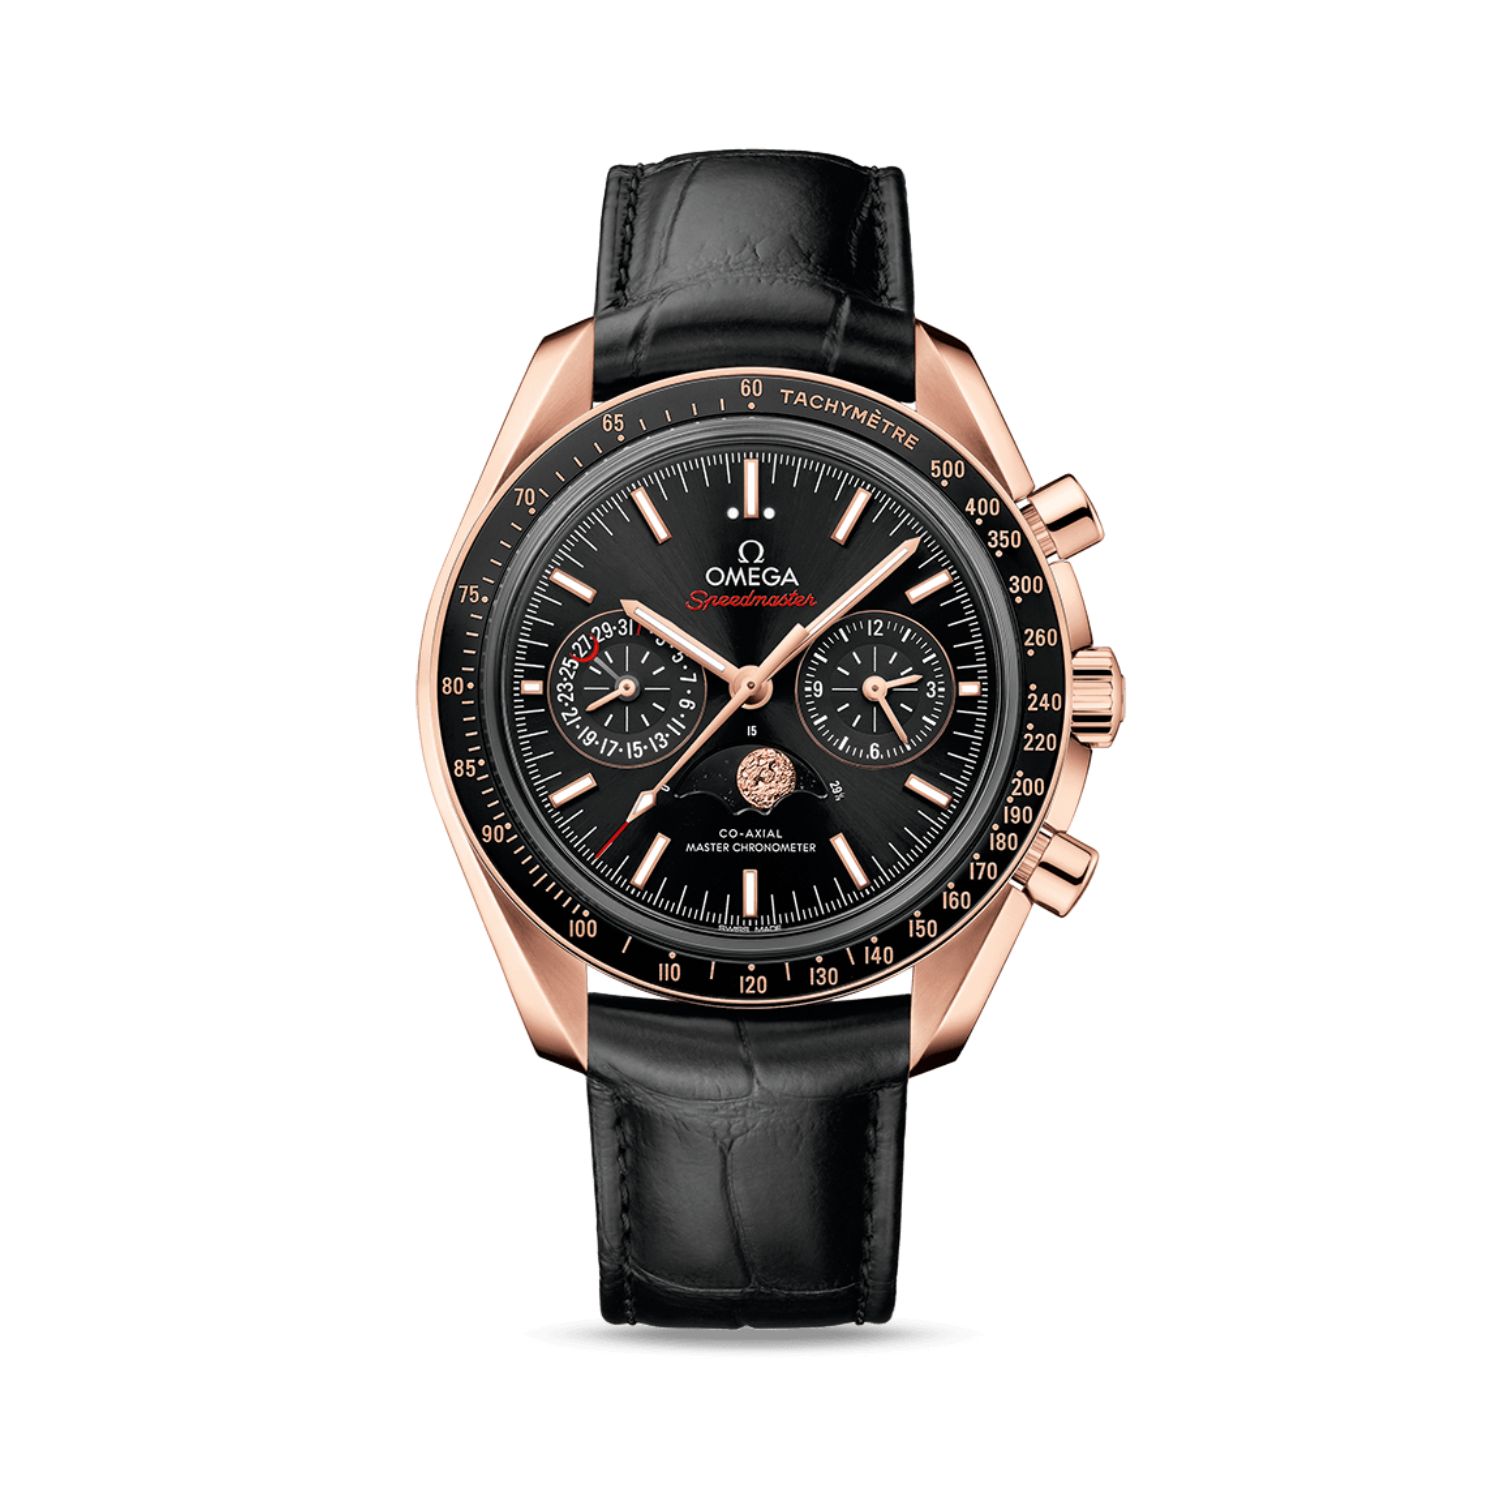 Montre speedmaster phases de lune co-axial master chronometer moonphase chronograph 44.25 mm - Omega